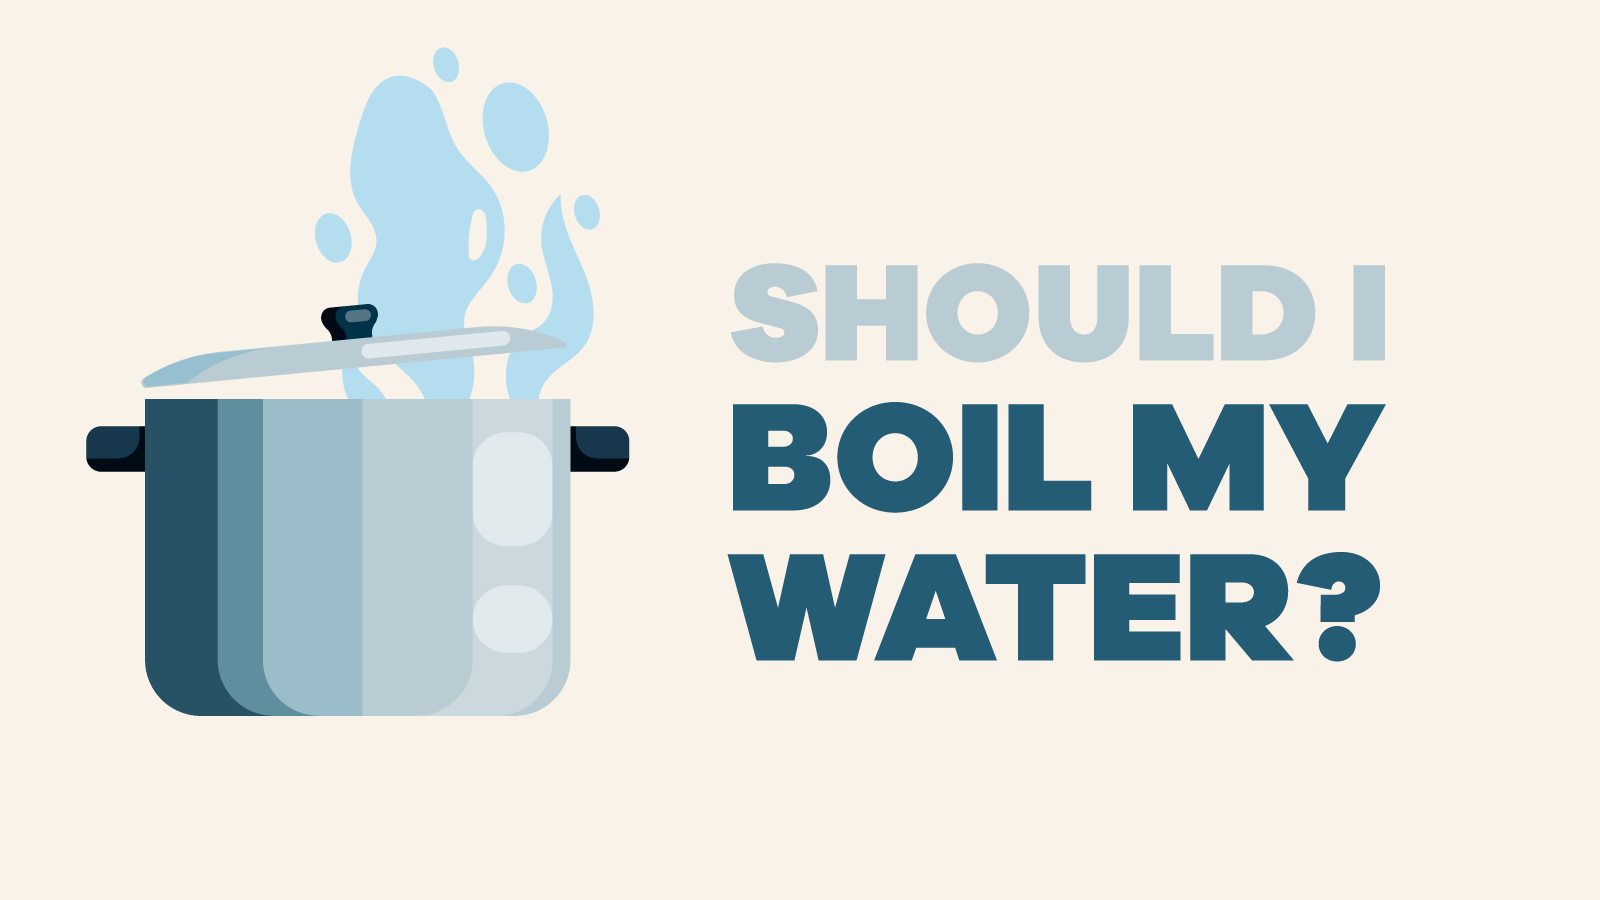 Get the Facts About Boiling Water